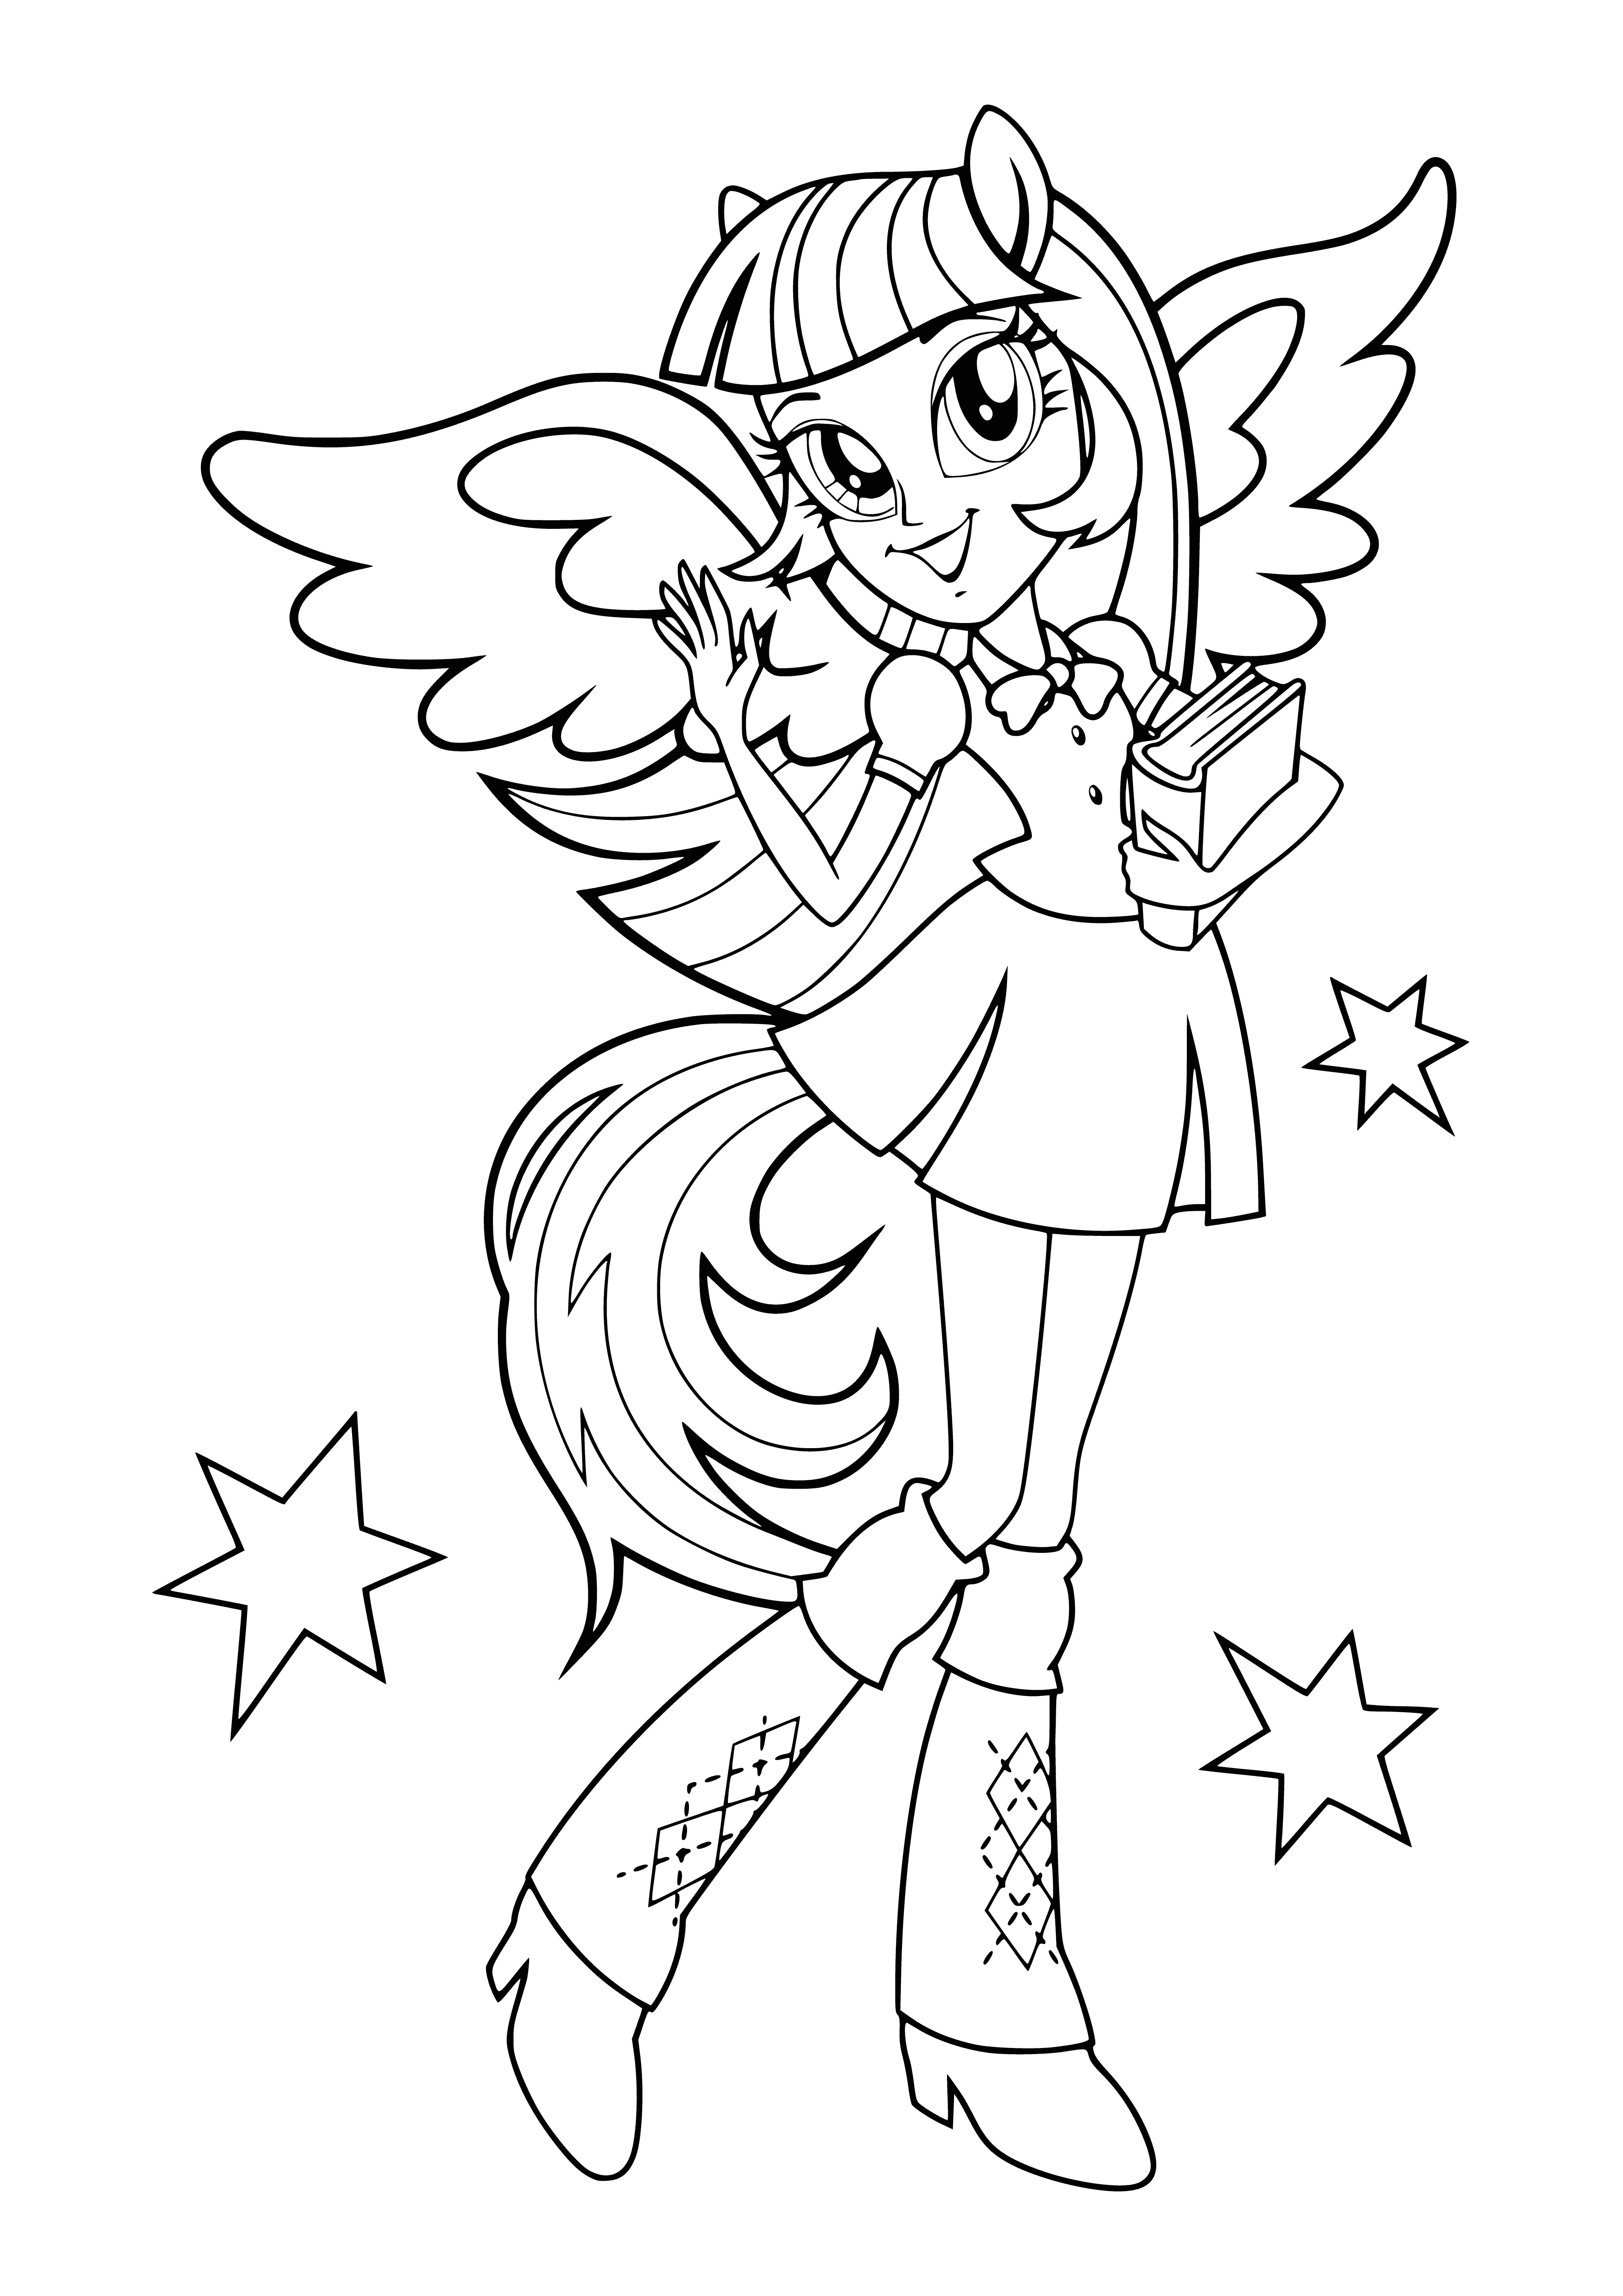 Twilight Sparkle is a magical girl with long purple hair, a striped shirt, skirt and bracelet. #magicalgirl